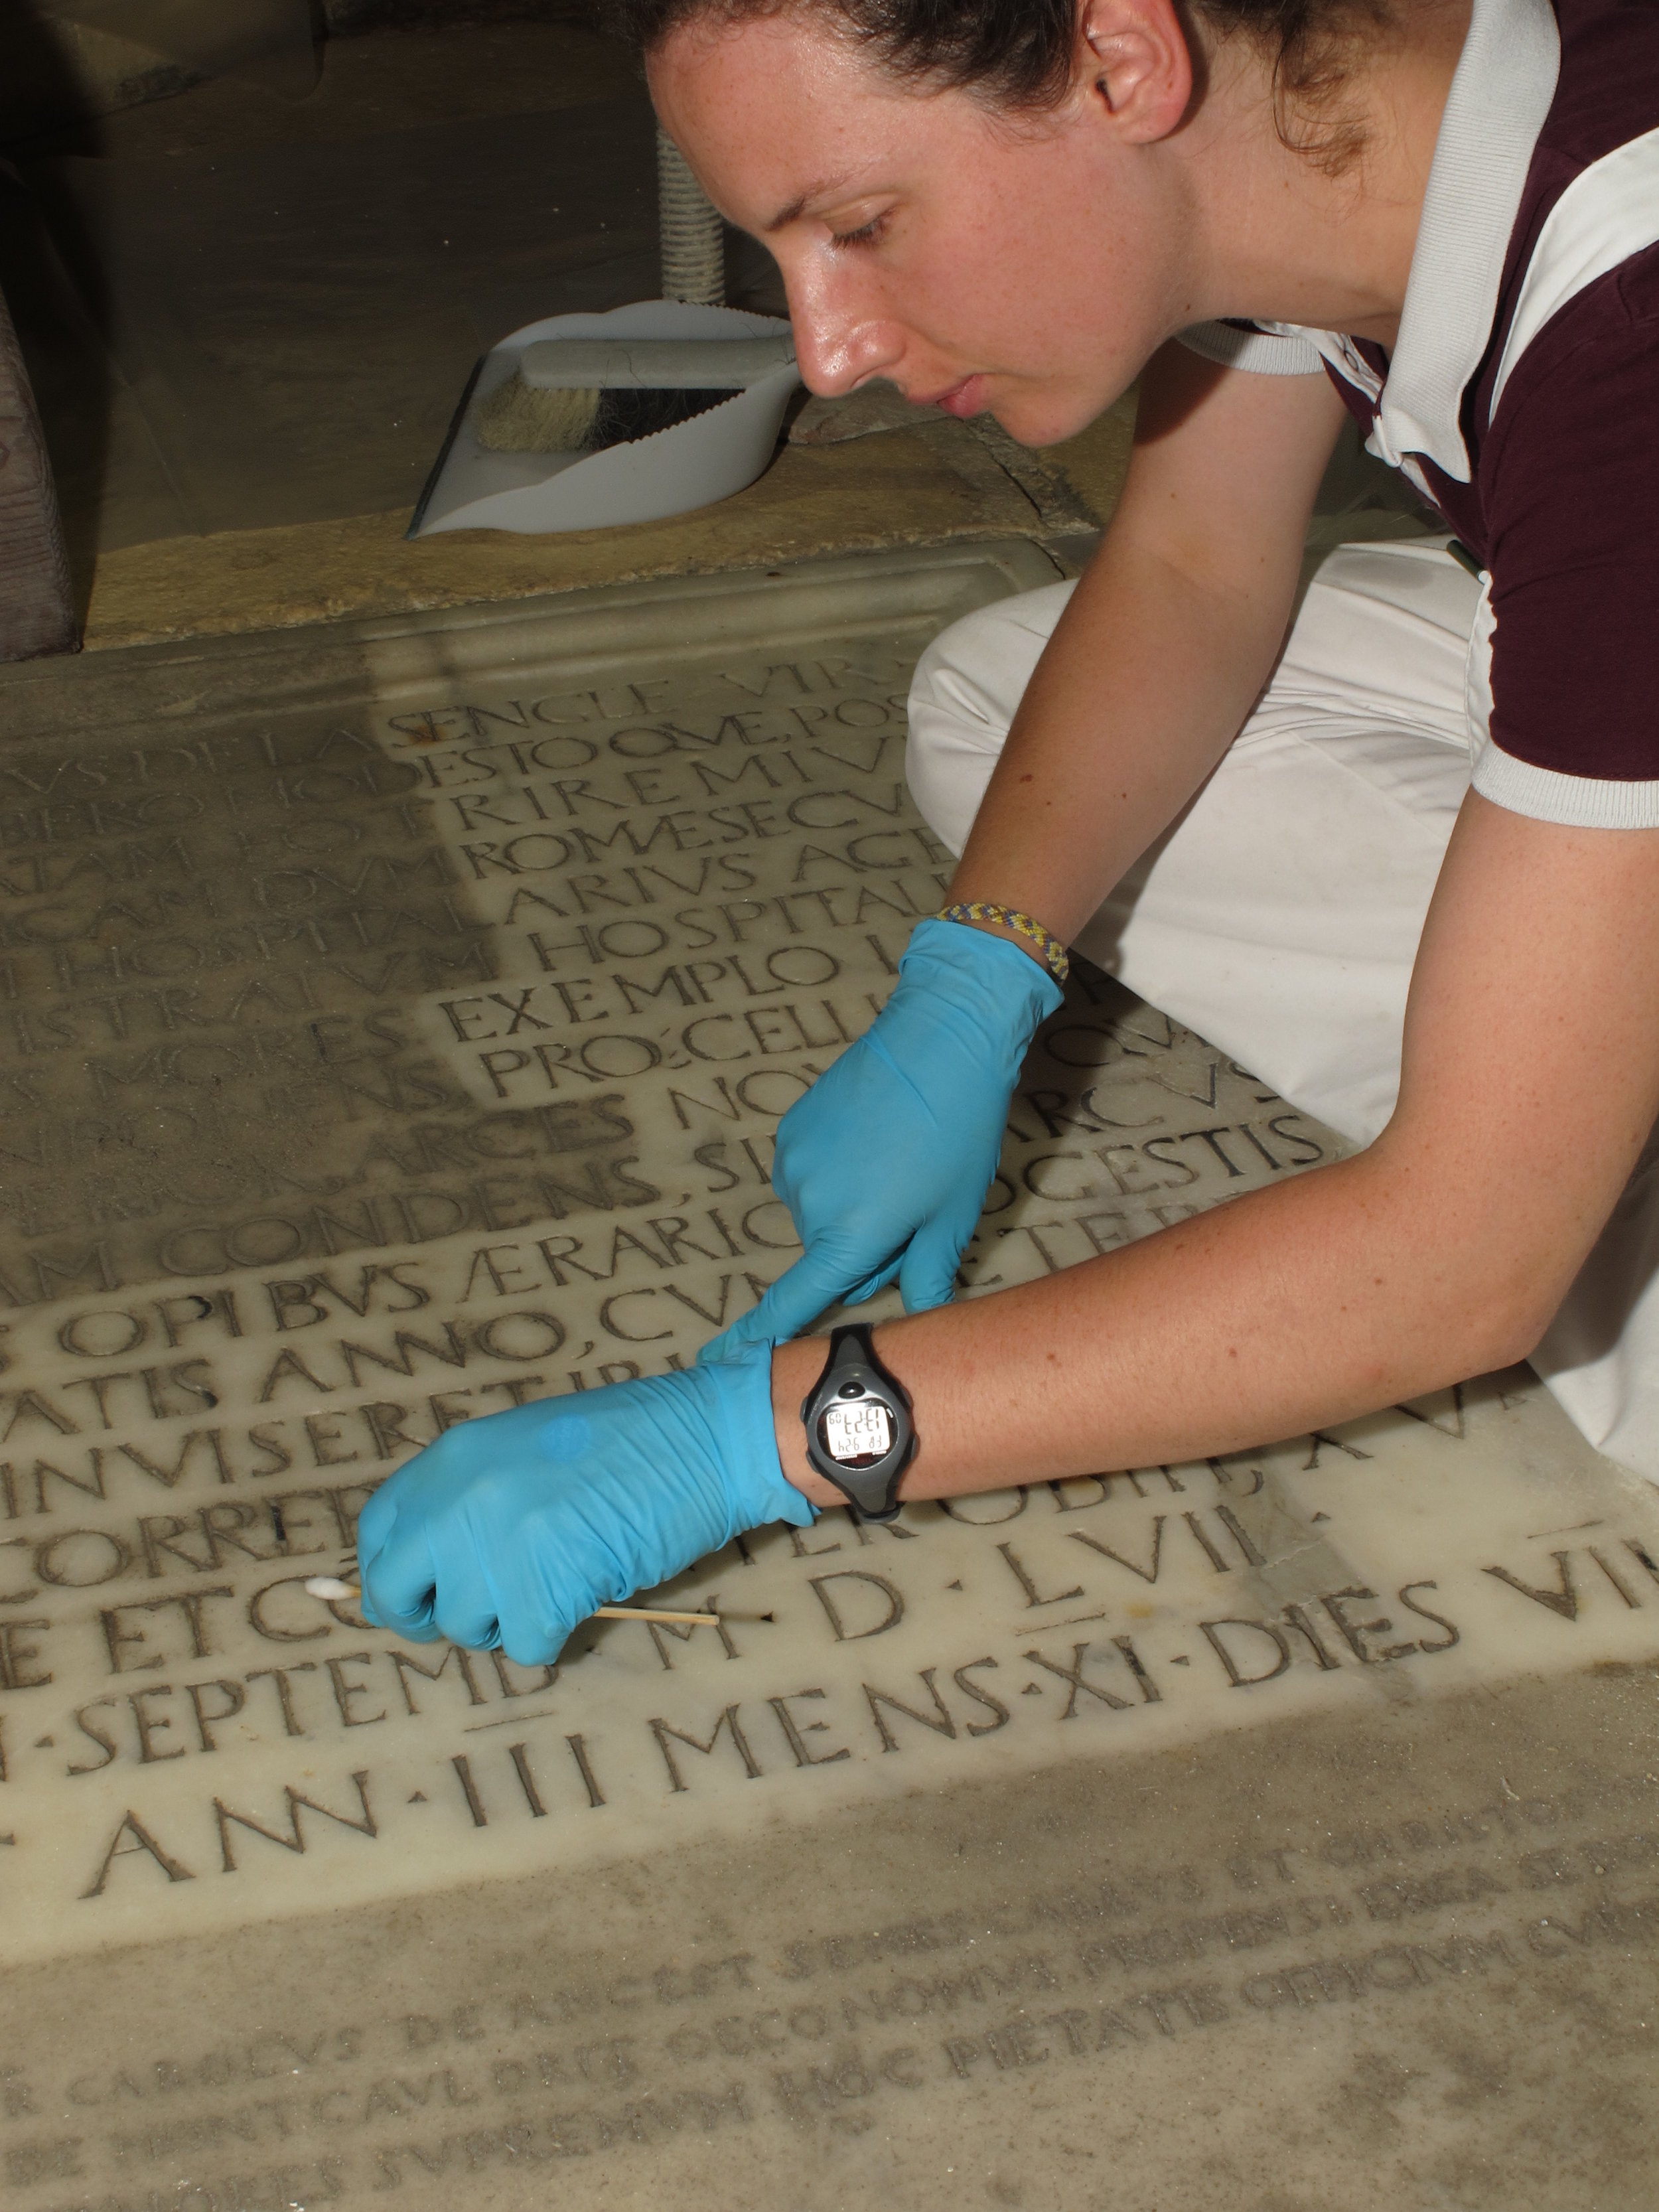  A thick layer of dirt was cleaned from the inscribed marble plaques set into the floor of the Crypt.  Image © Courtauld CWPD 